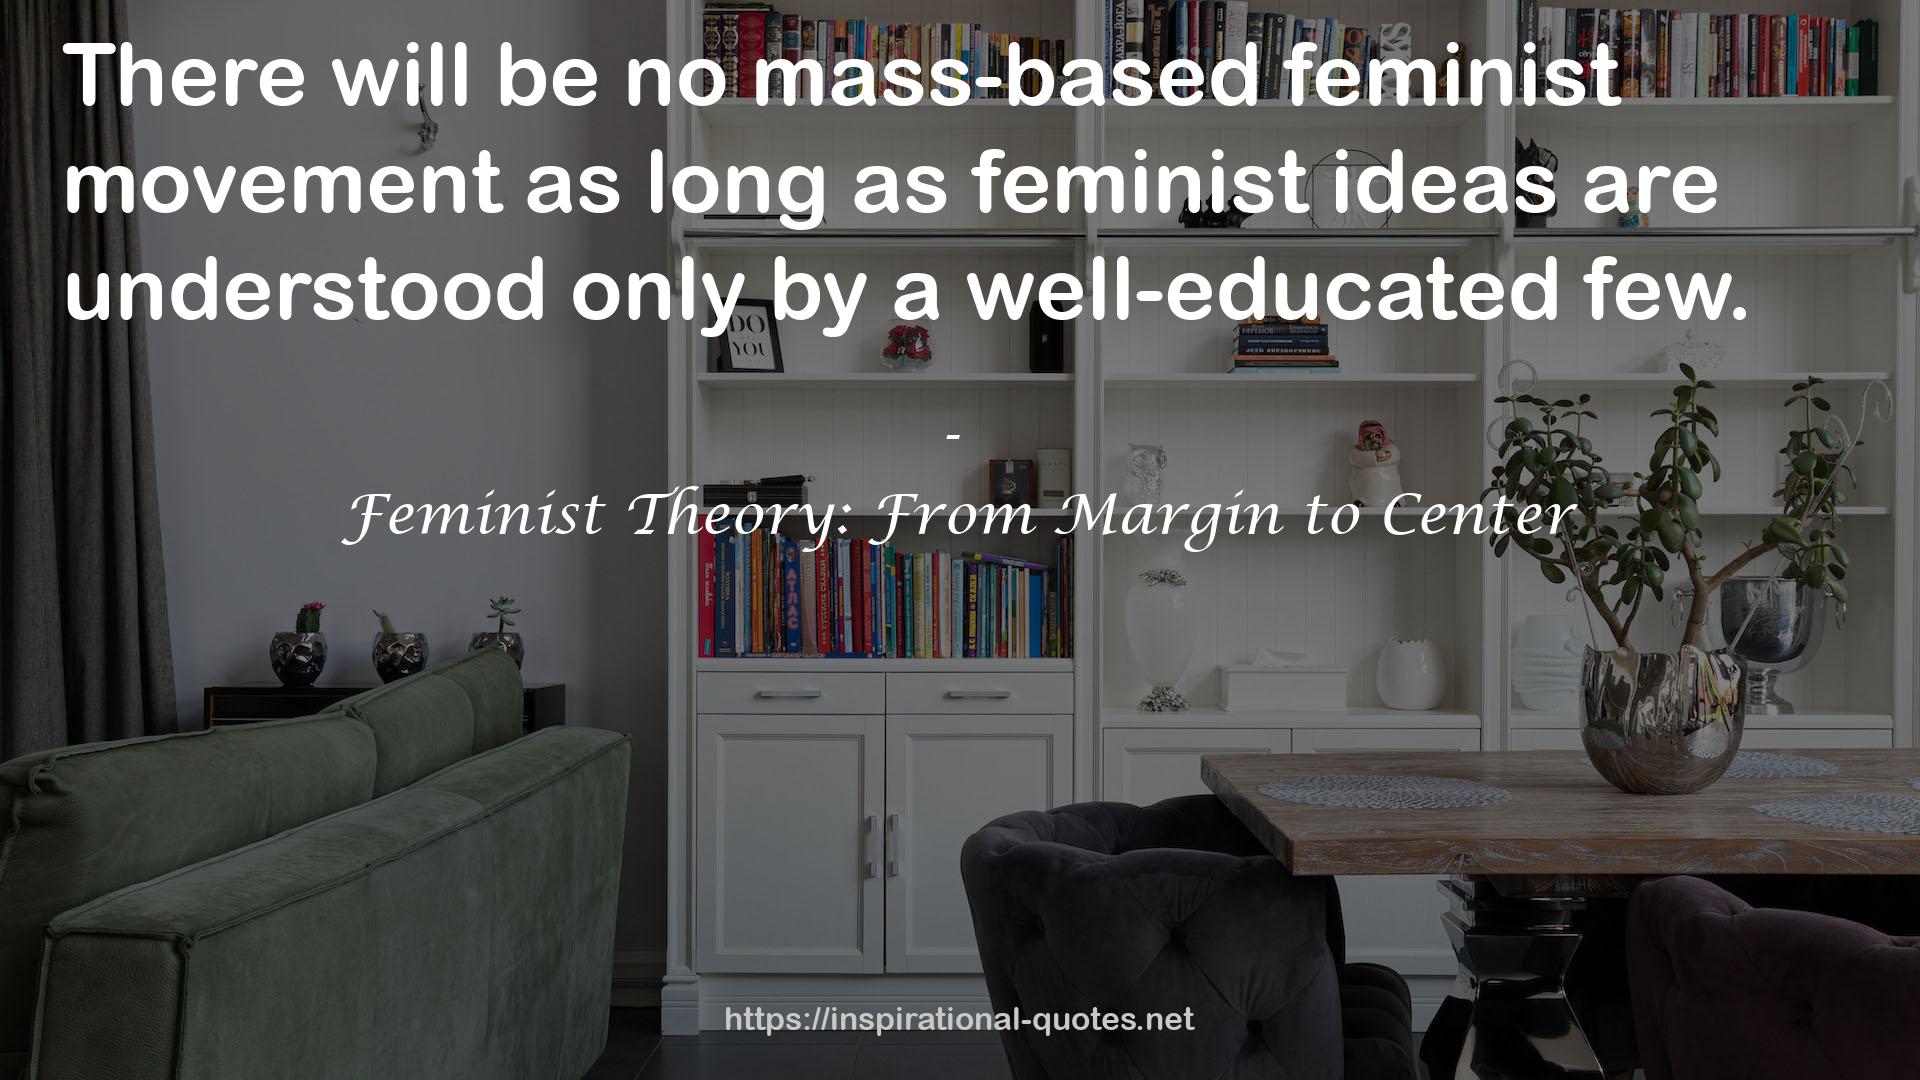 Feminist Theory: From Margin to Center QUOTES